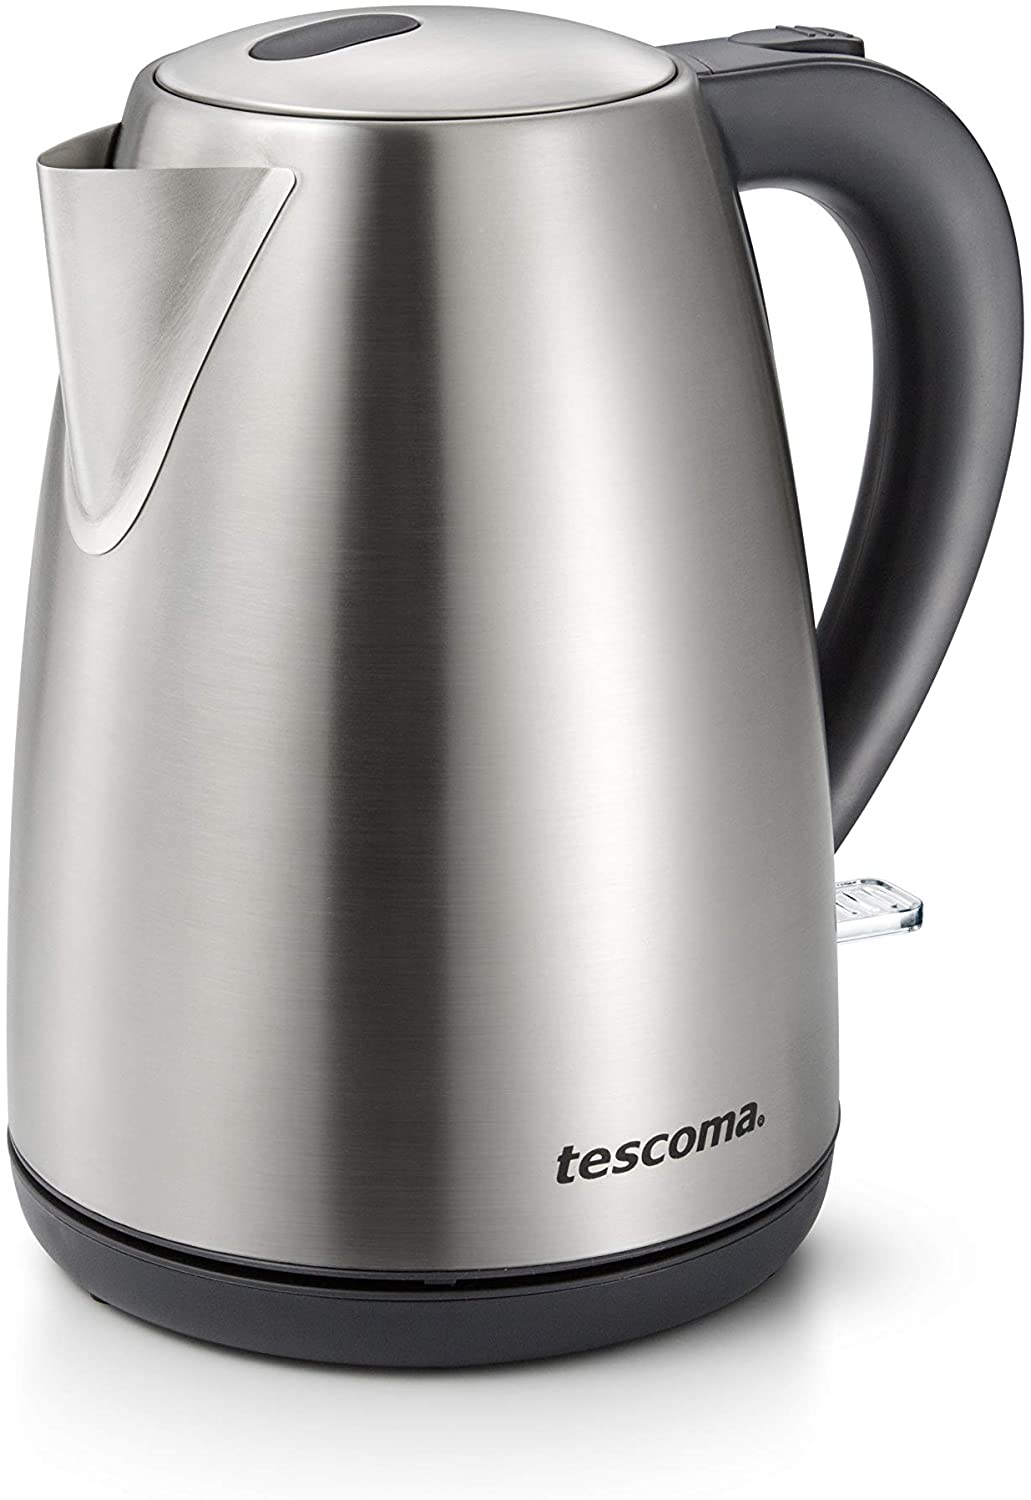 Tescoma Gand Chef 677816 Electric Kettle, 1.7 L